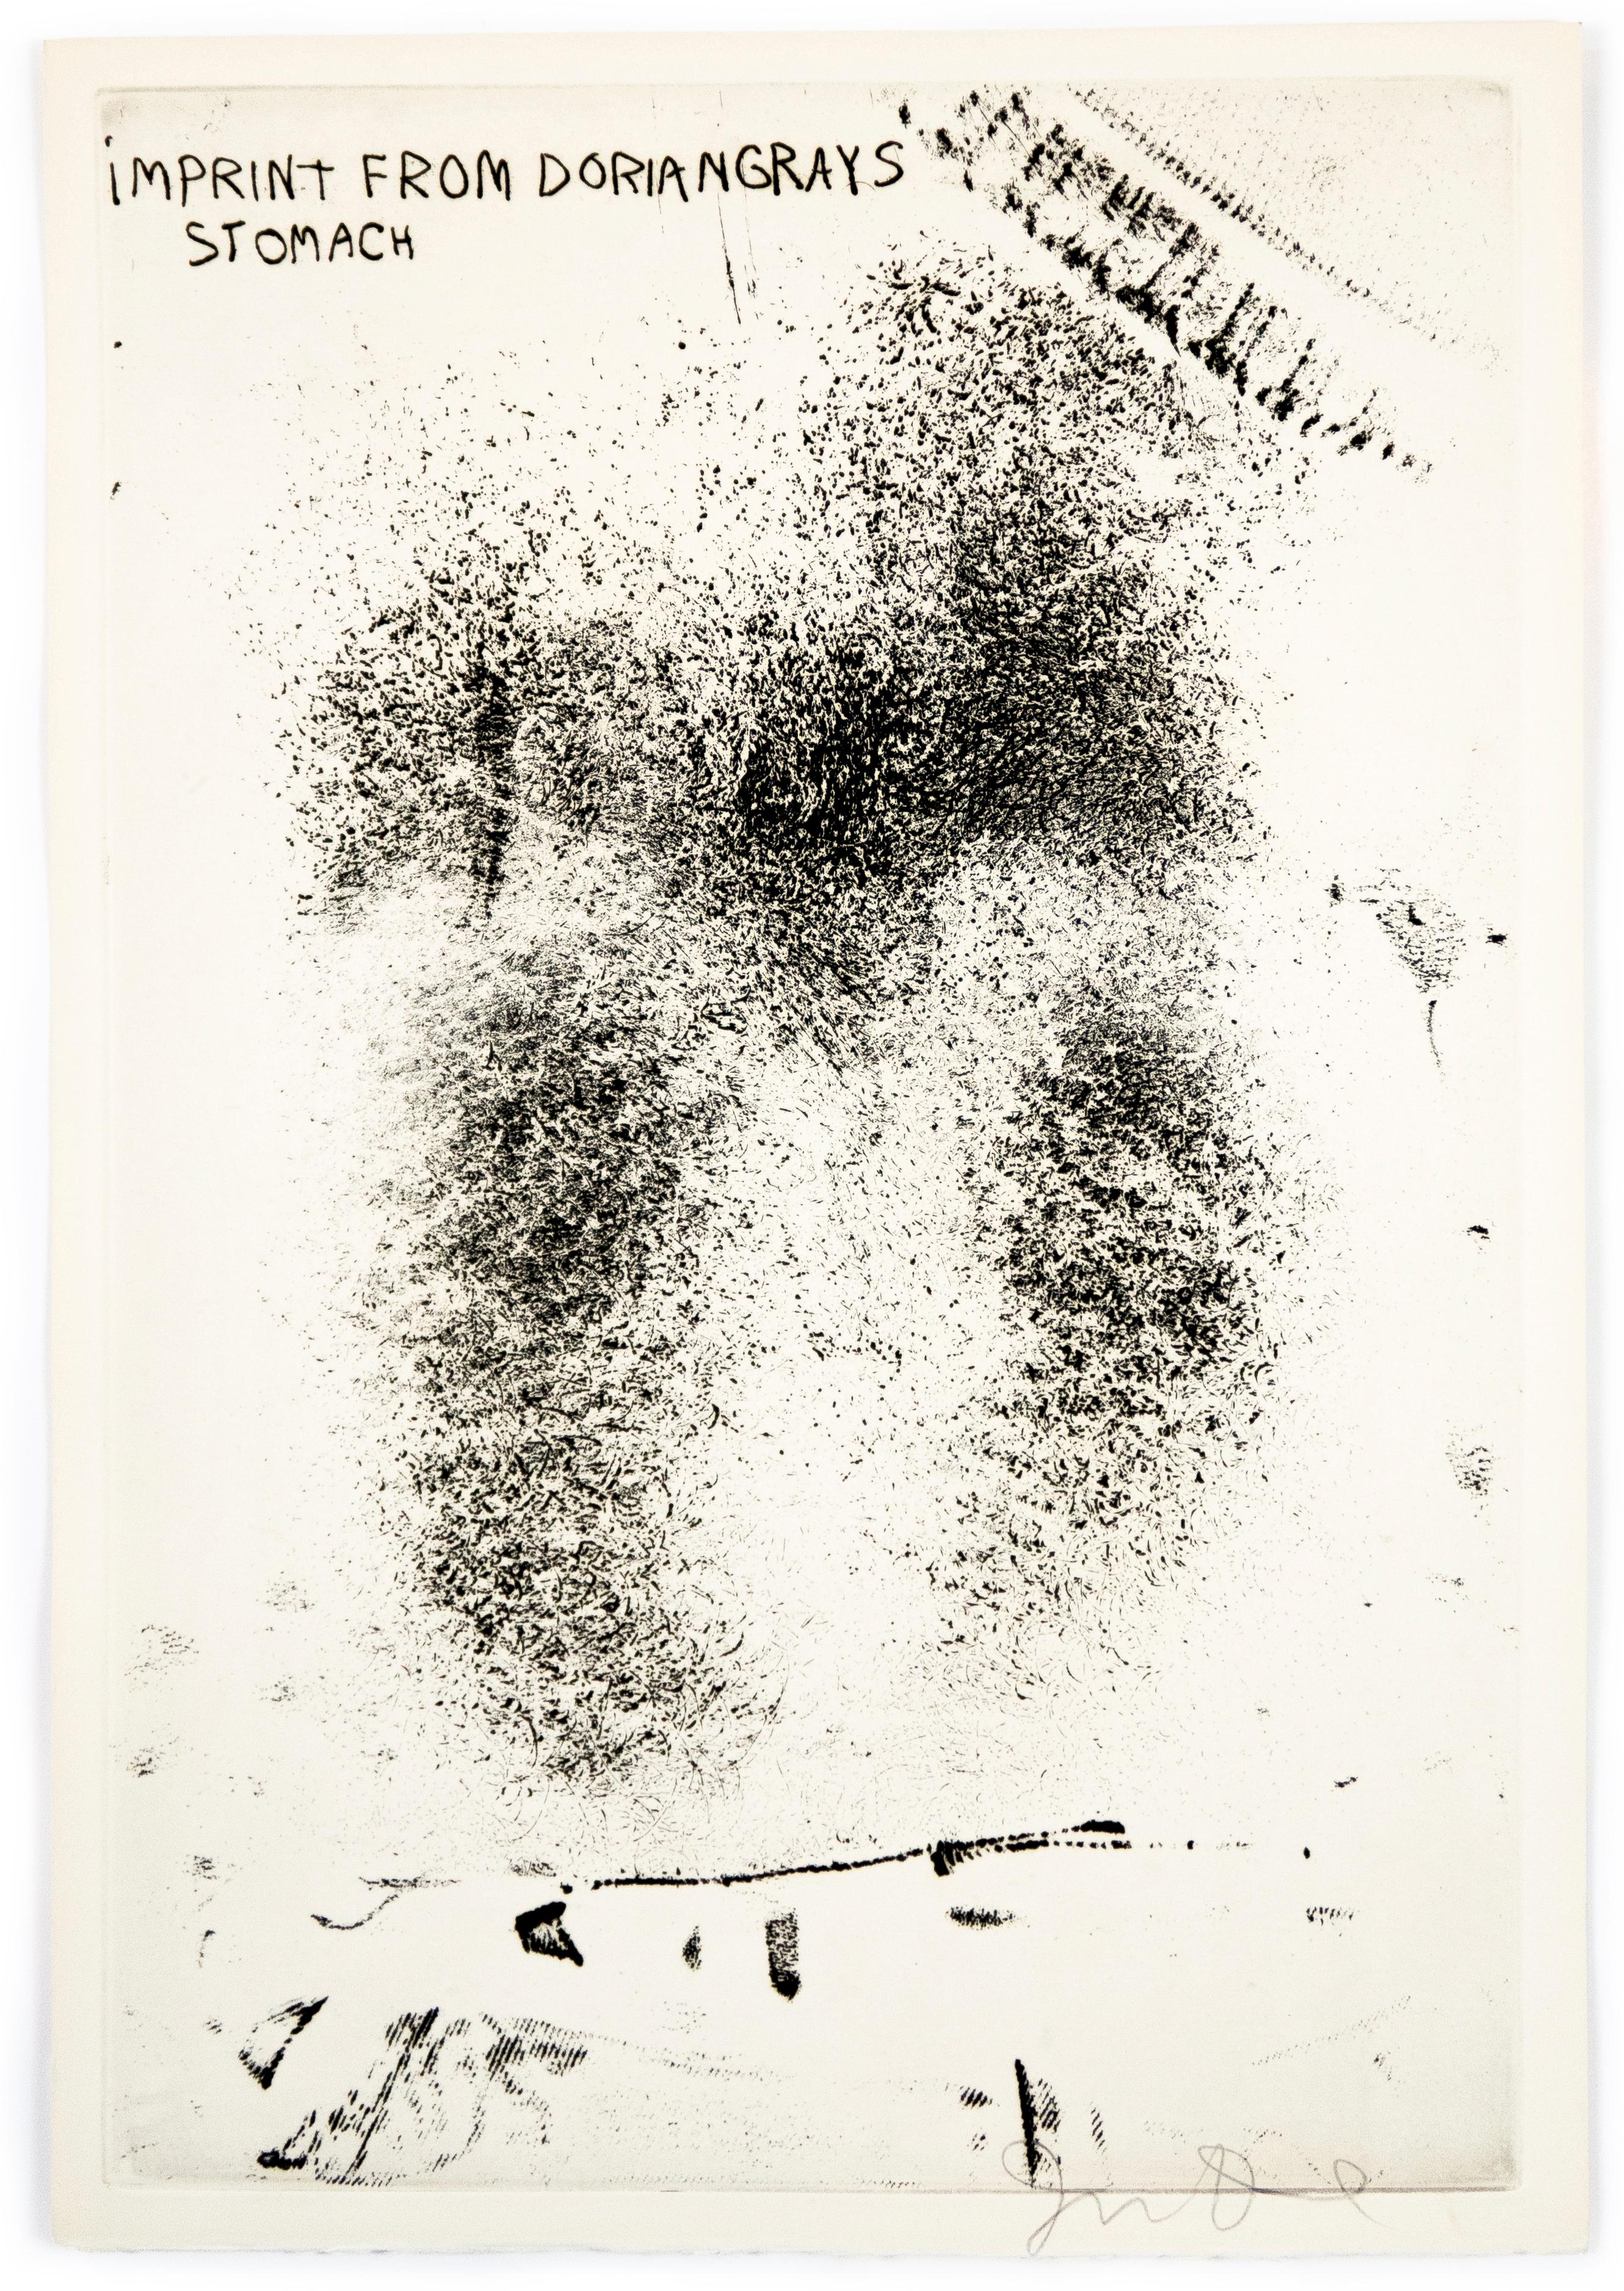 Imprint from Dorian Gray's Stomach from "The Picture of Dorian Gray"